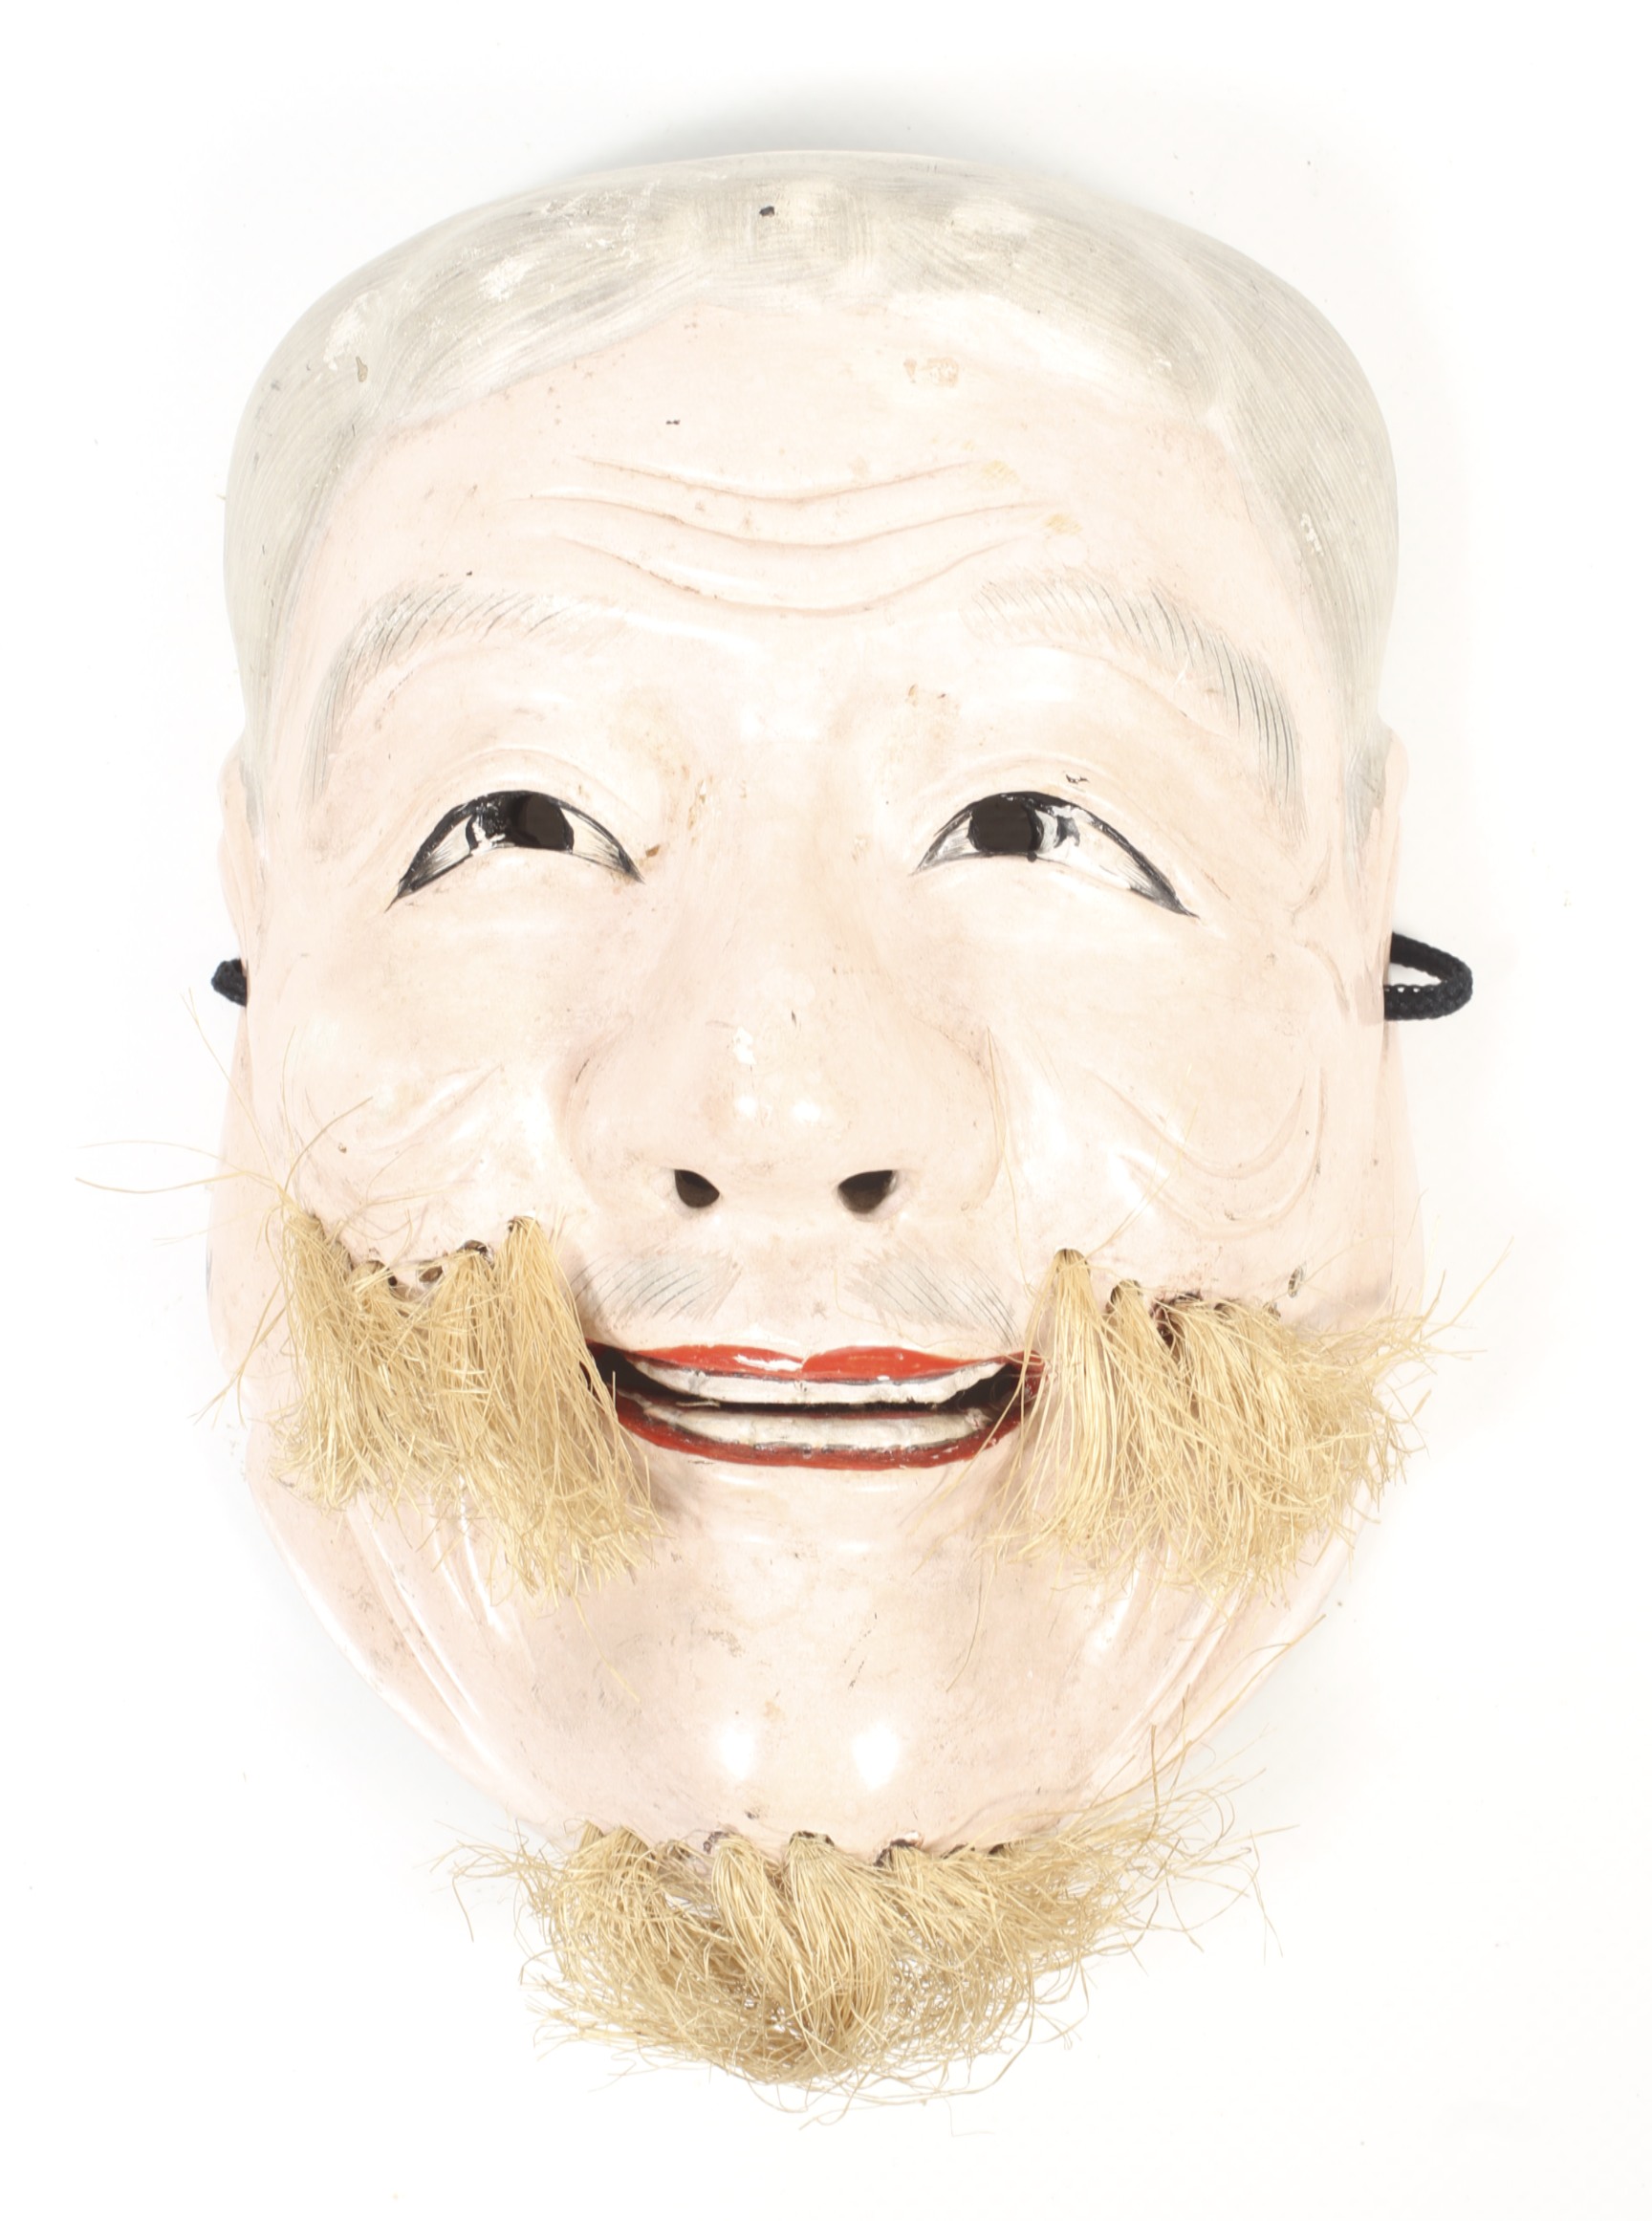 A 19th/early 20th century Japanese mask, probably for Kagura performances.